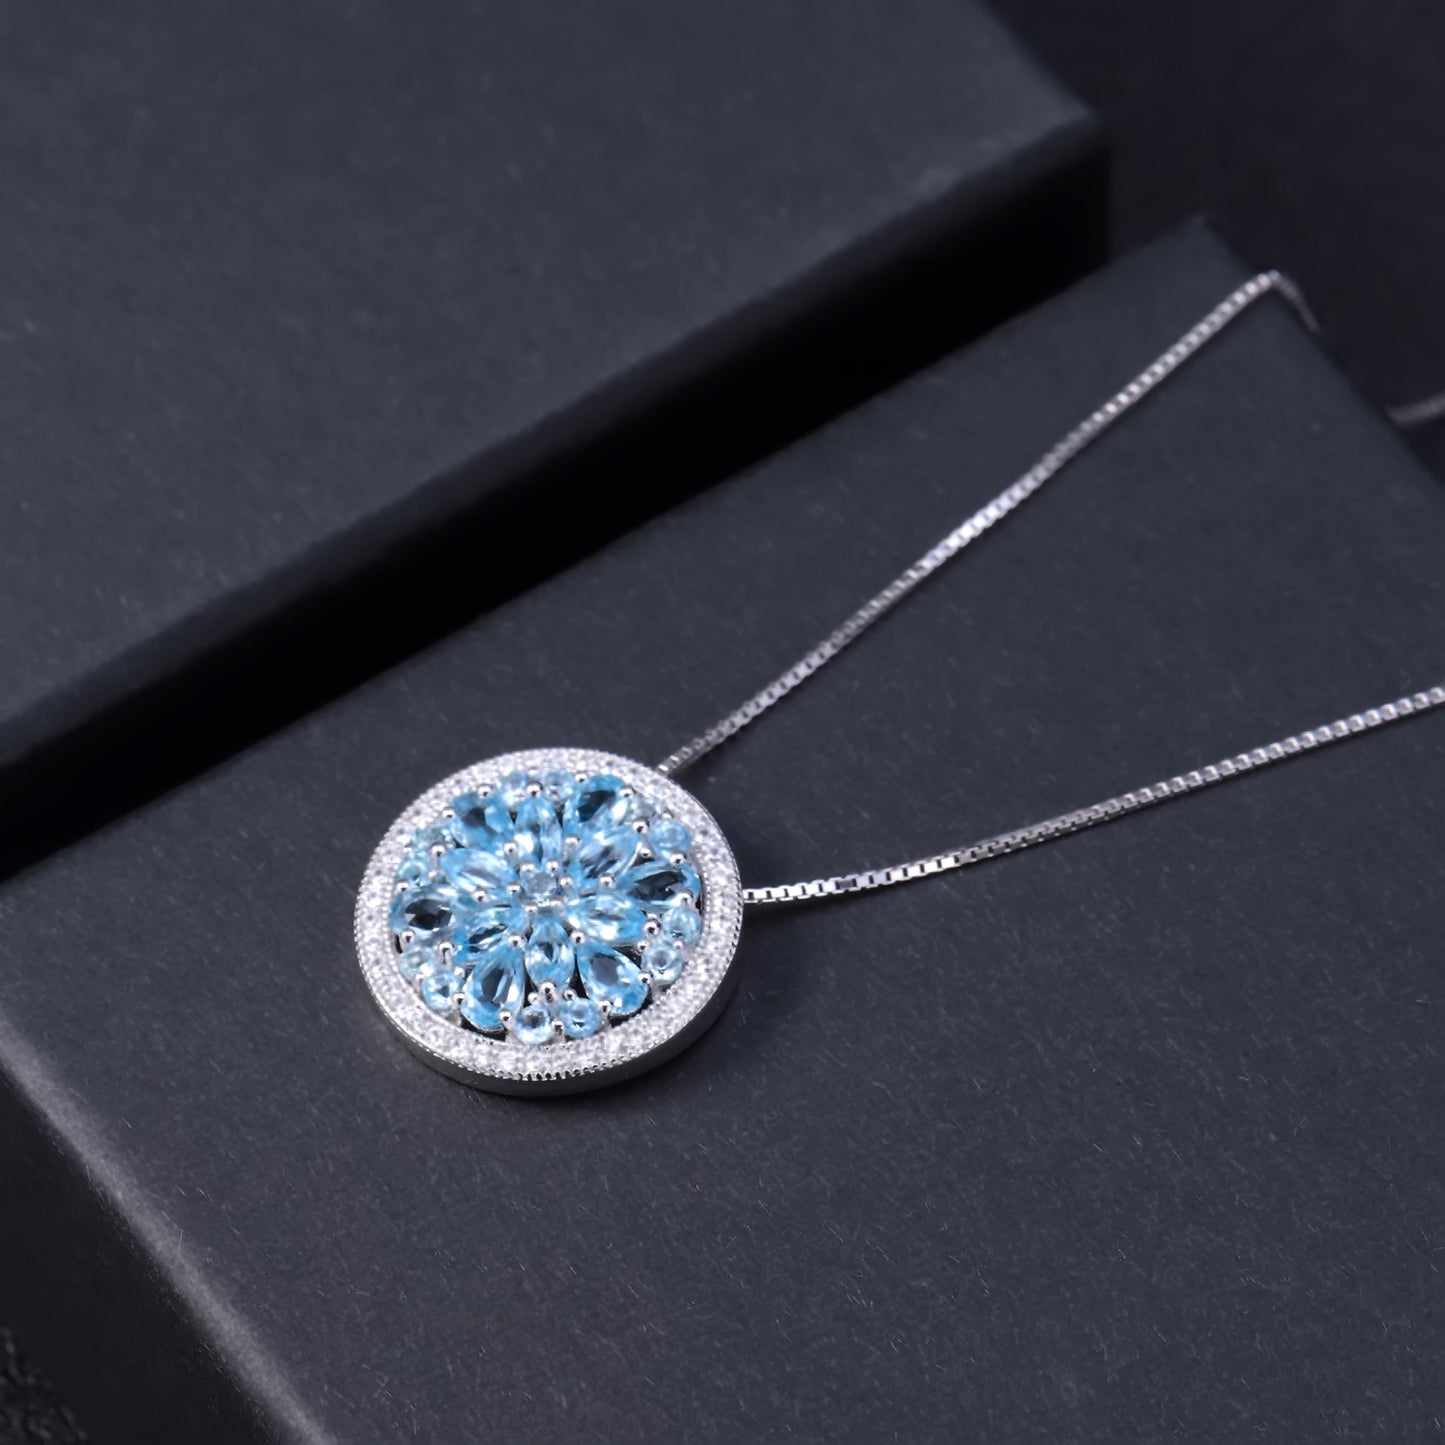 Swiss Blue Topaz Squad Pendant Necklace in Sterling Silver